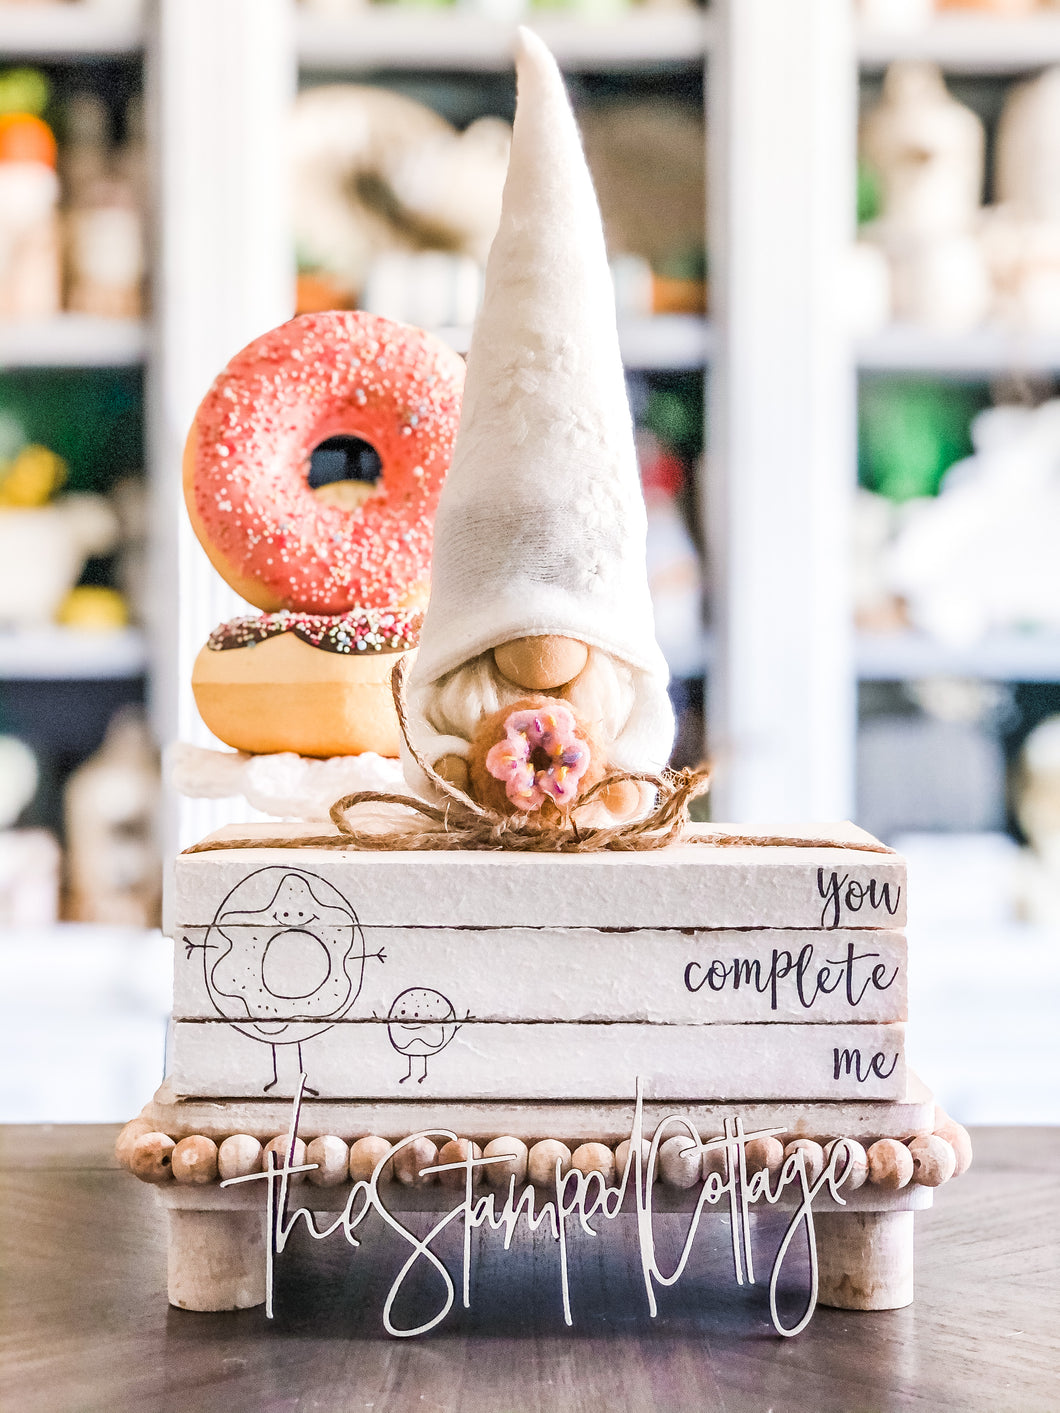 Stamped Book Stack - you complete me with donut and donut hole